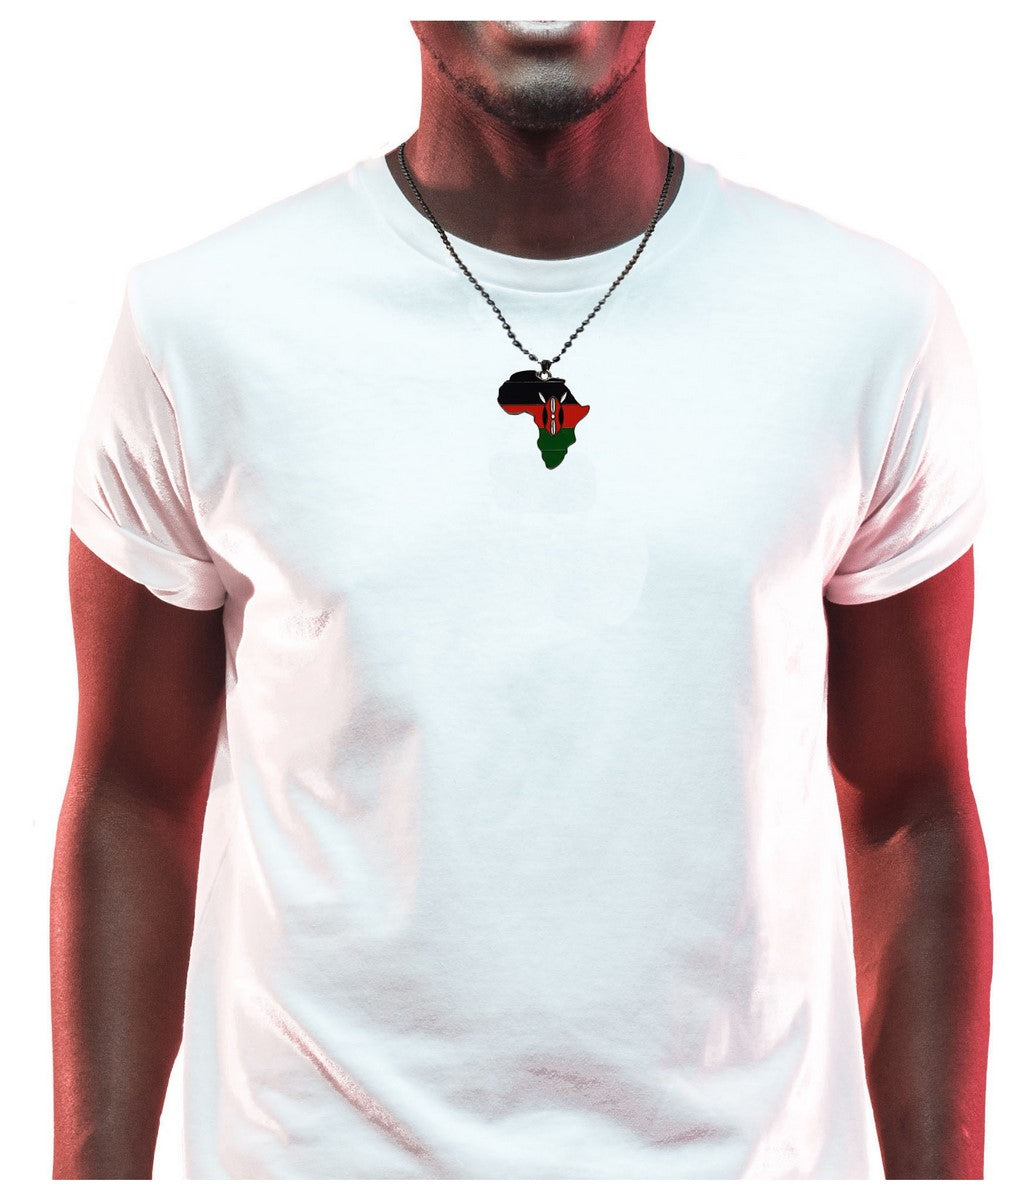 Kenya Flag Pendant Necklace African Map Chain